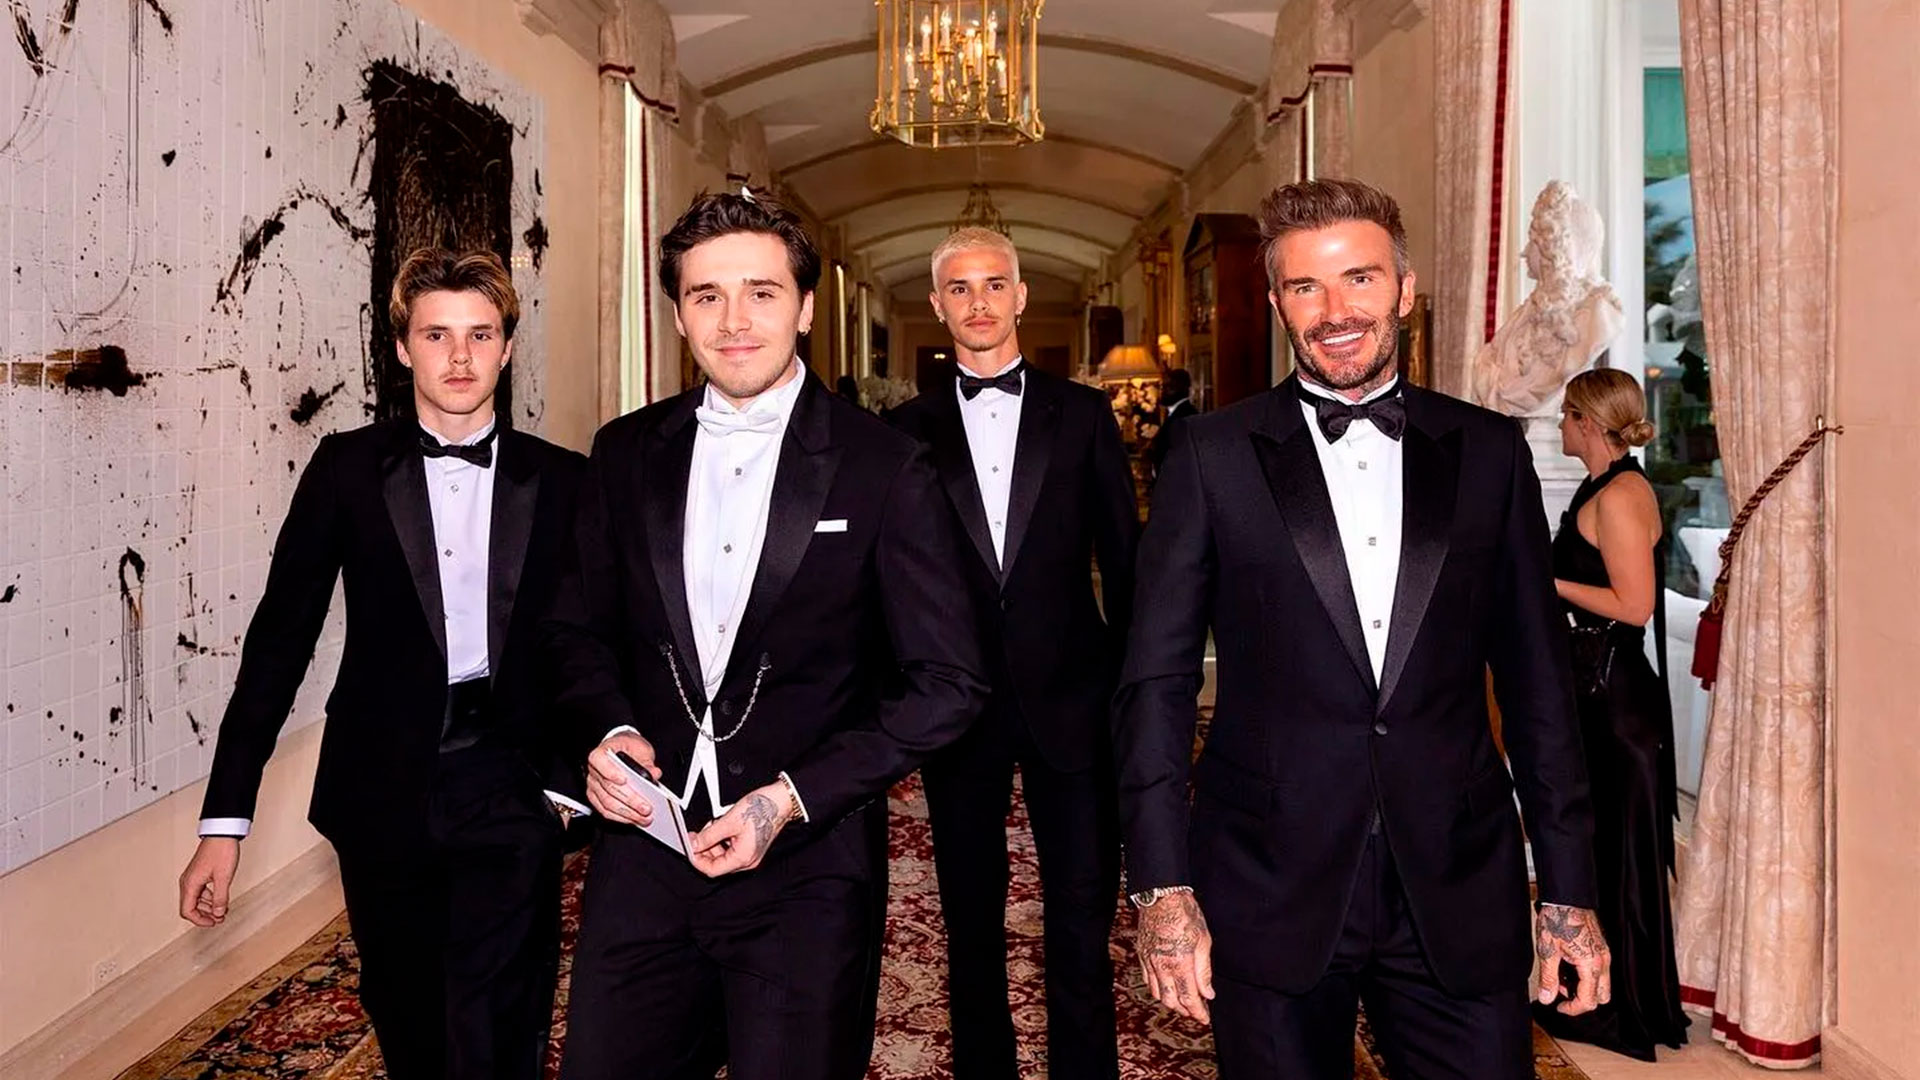 The luxurious gift that David Beckham and his wife Victoria gave to their son for their marriage: the wedding photos